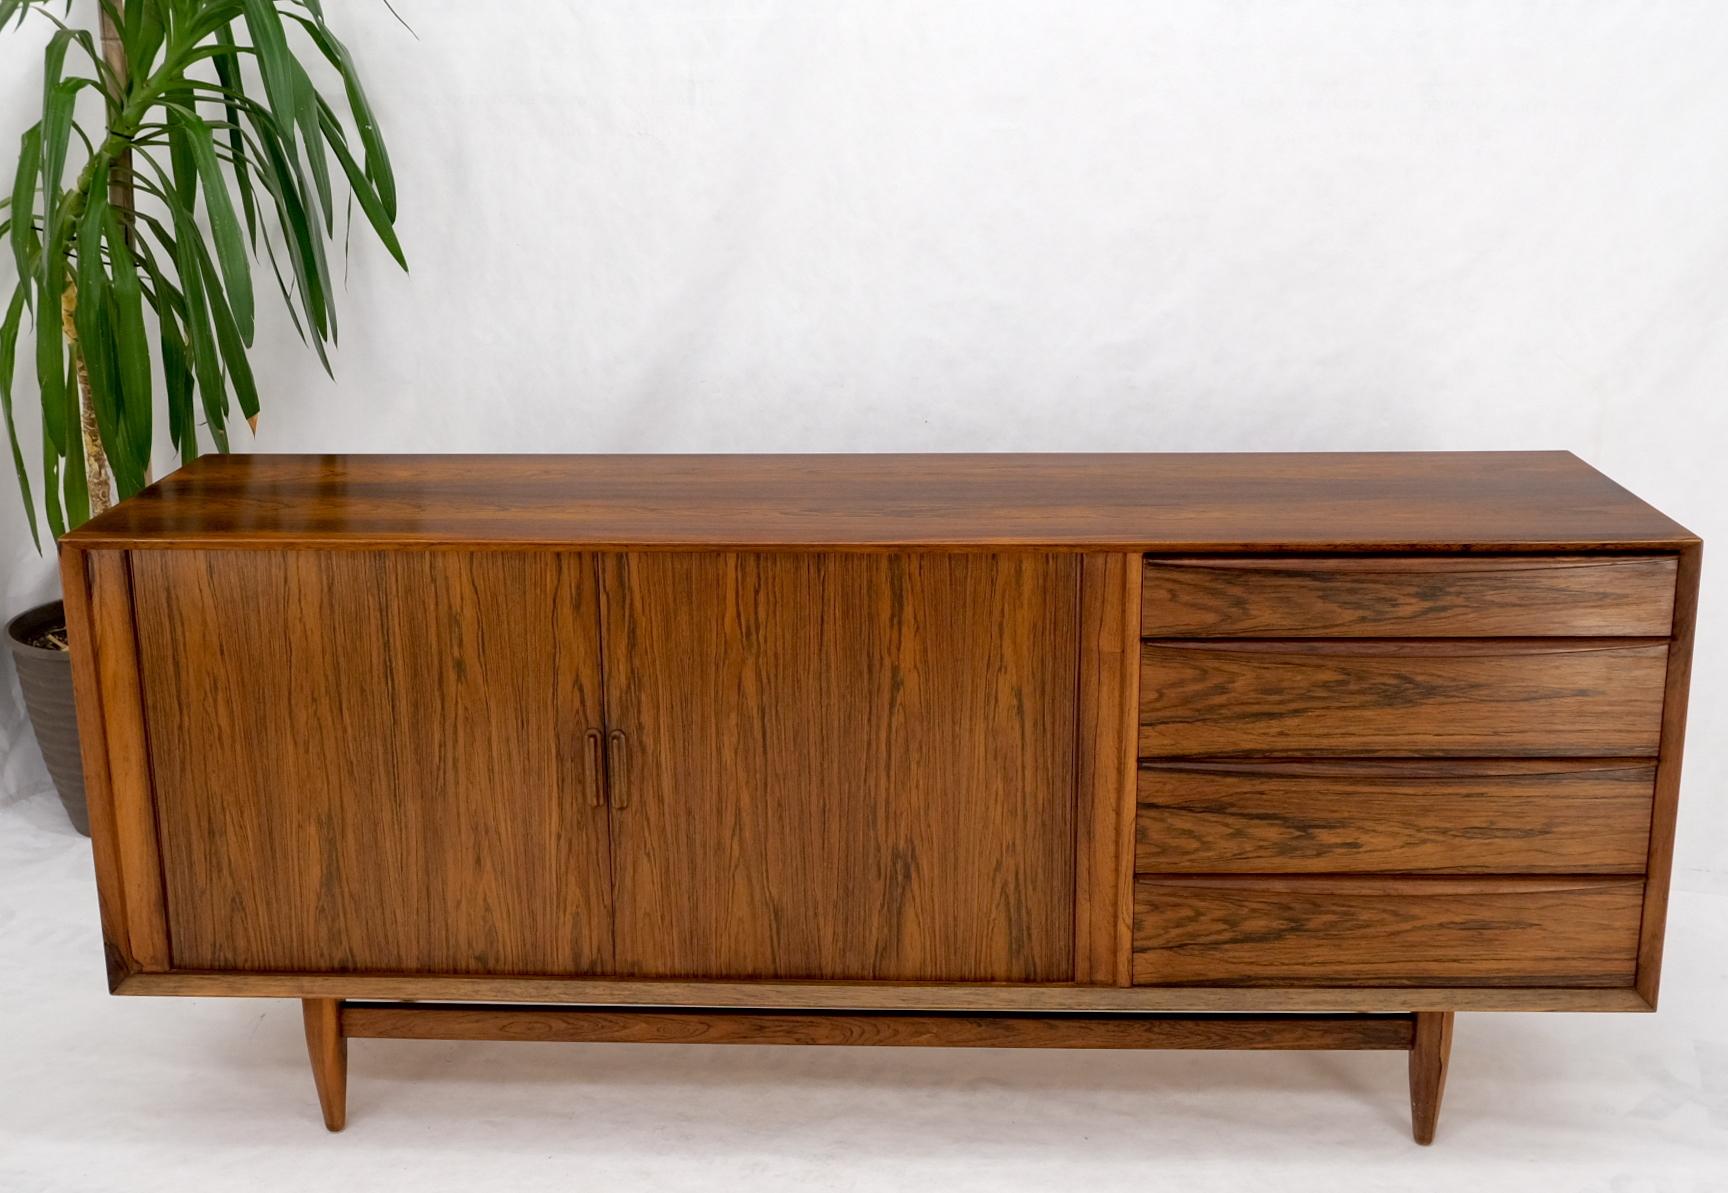 20th Century Danish Mid Century Modern Rosewood Tambour Doors Sideboard Credenza Falster For Sale